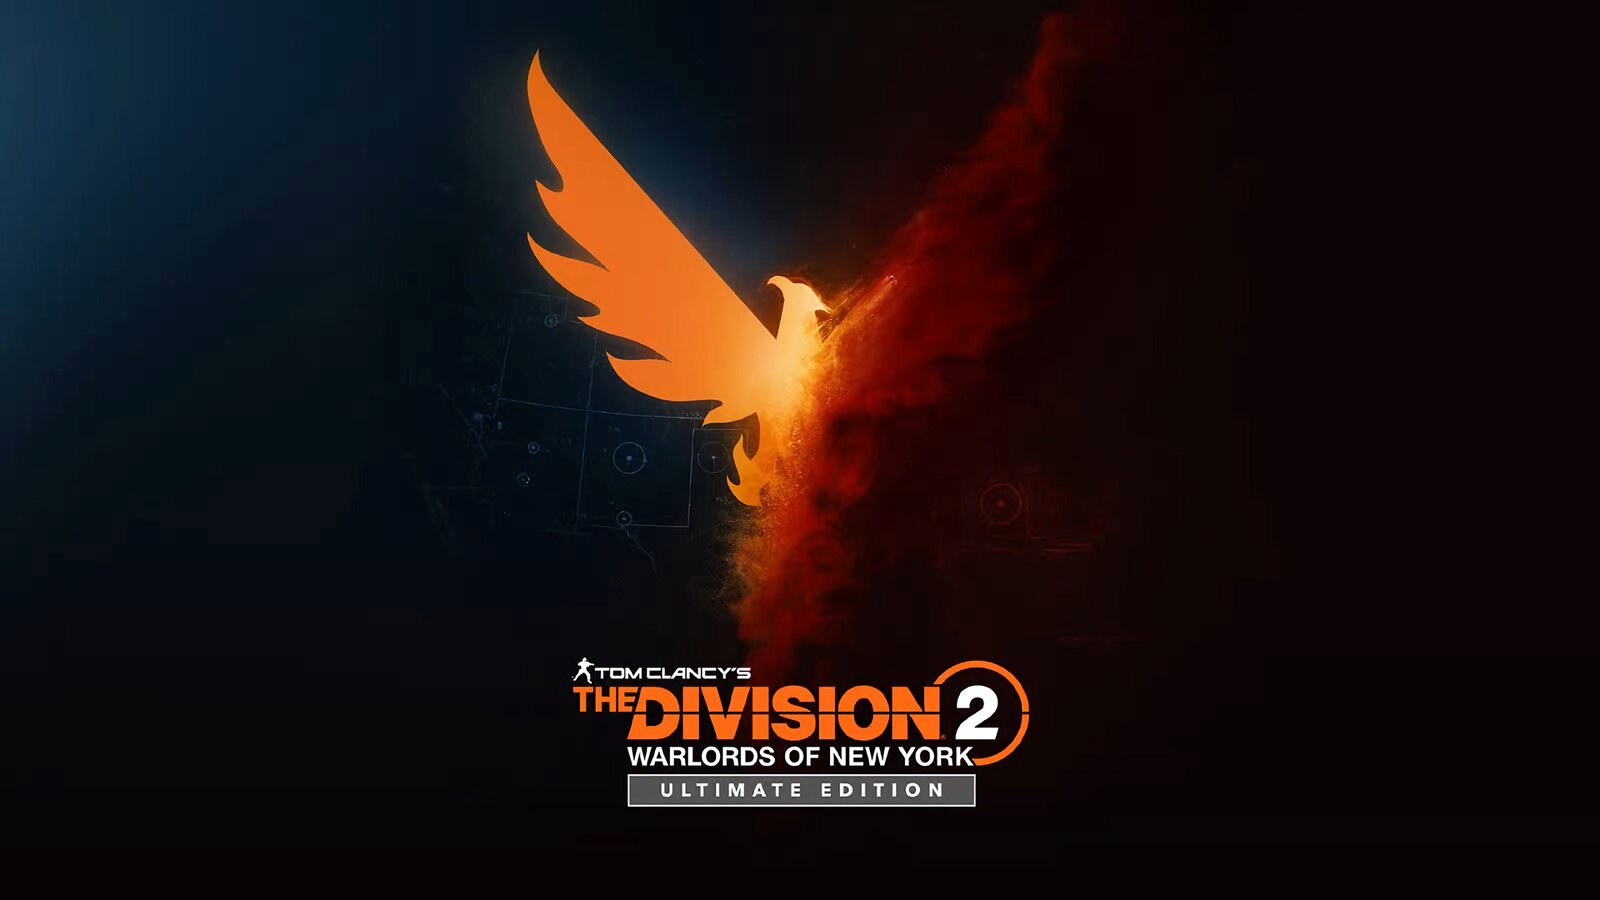 Tom Clancy’s The Division 2 - Warlords of New York Ultimate Edition